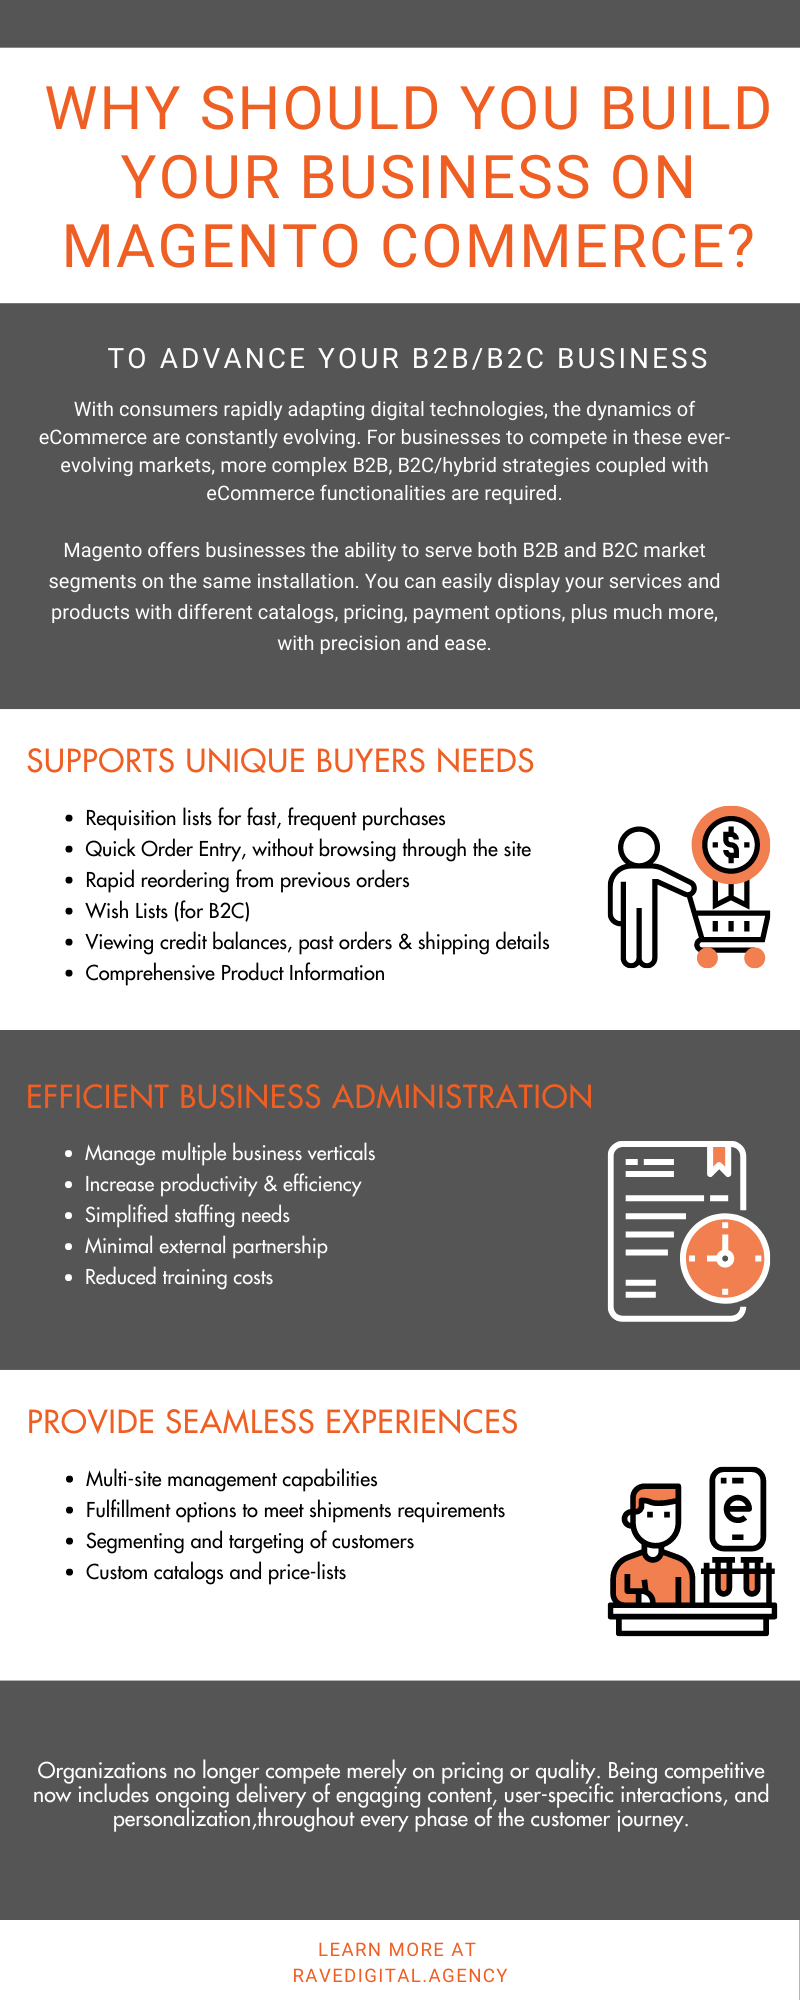 Why Should You Build Your BUSINESS on Magento Commerce?